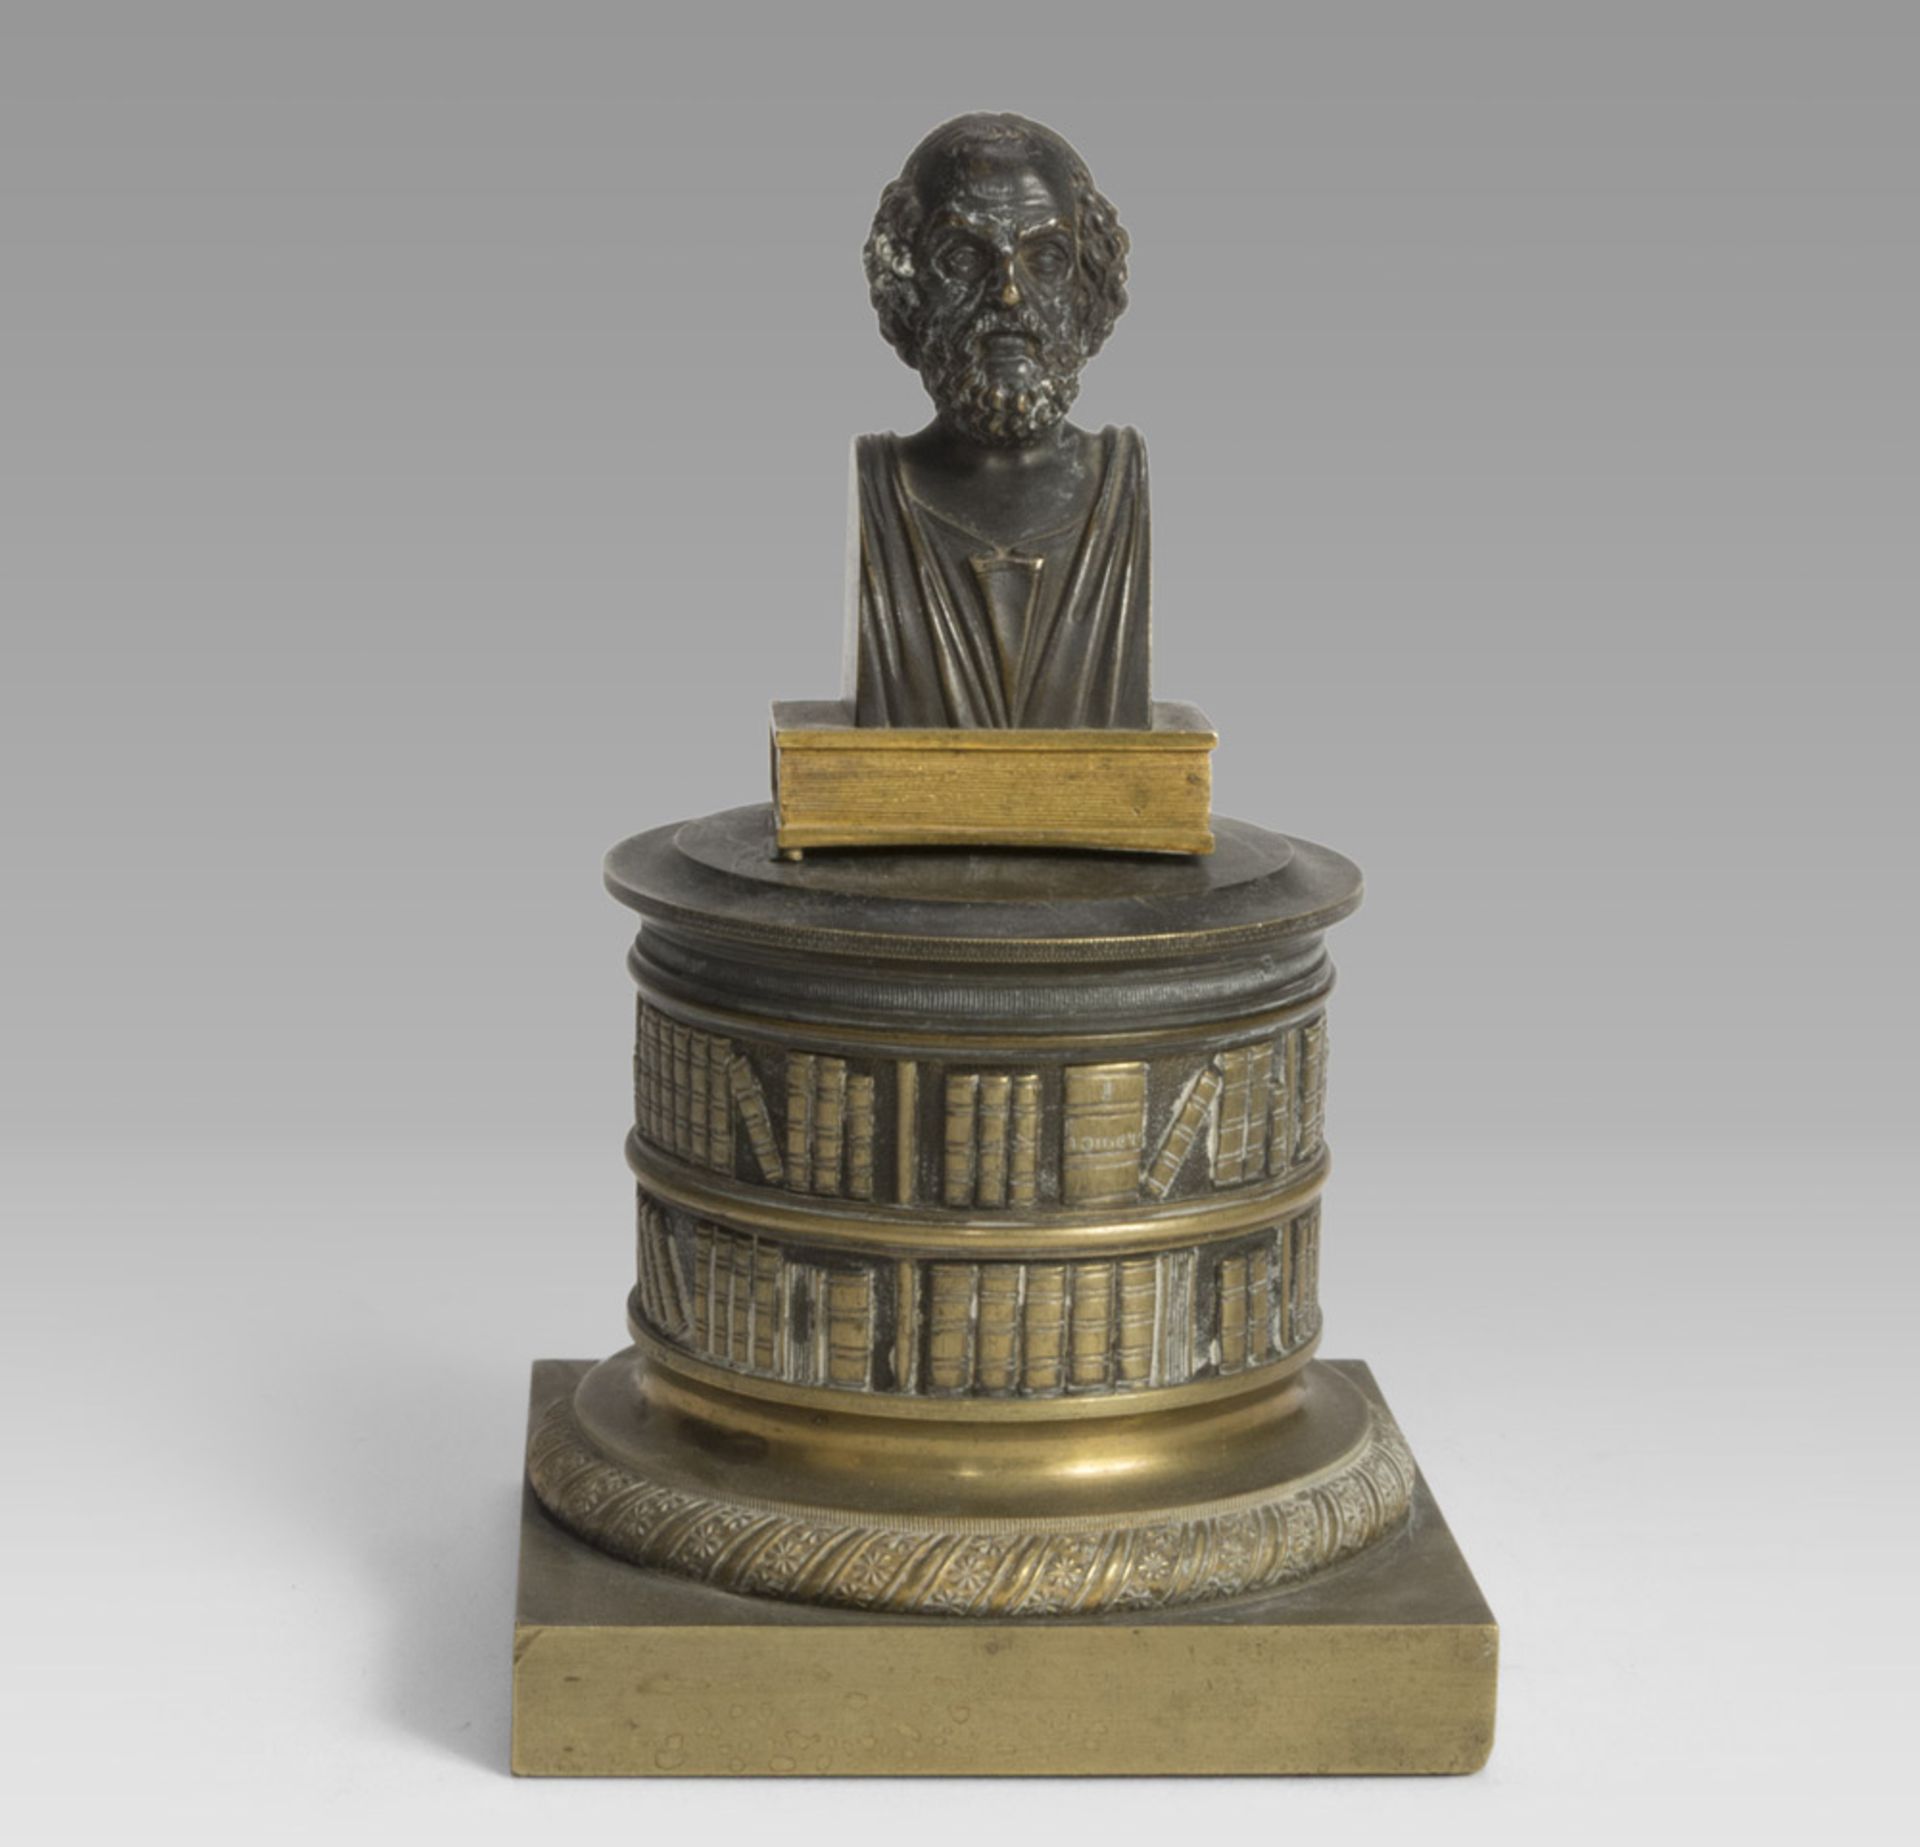 MIGNON BUST IN BURNISHED BRONZE, EARLY 19TH CENTURY representing Philosopher. Circular basement in